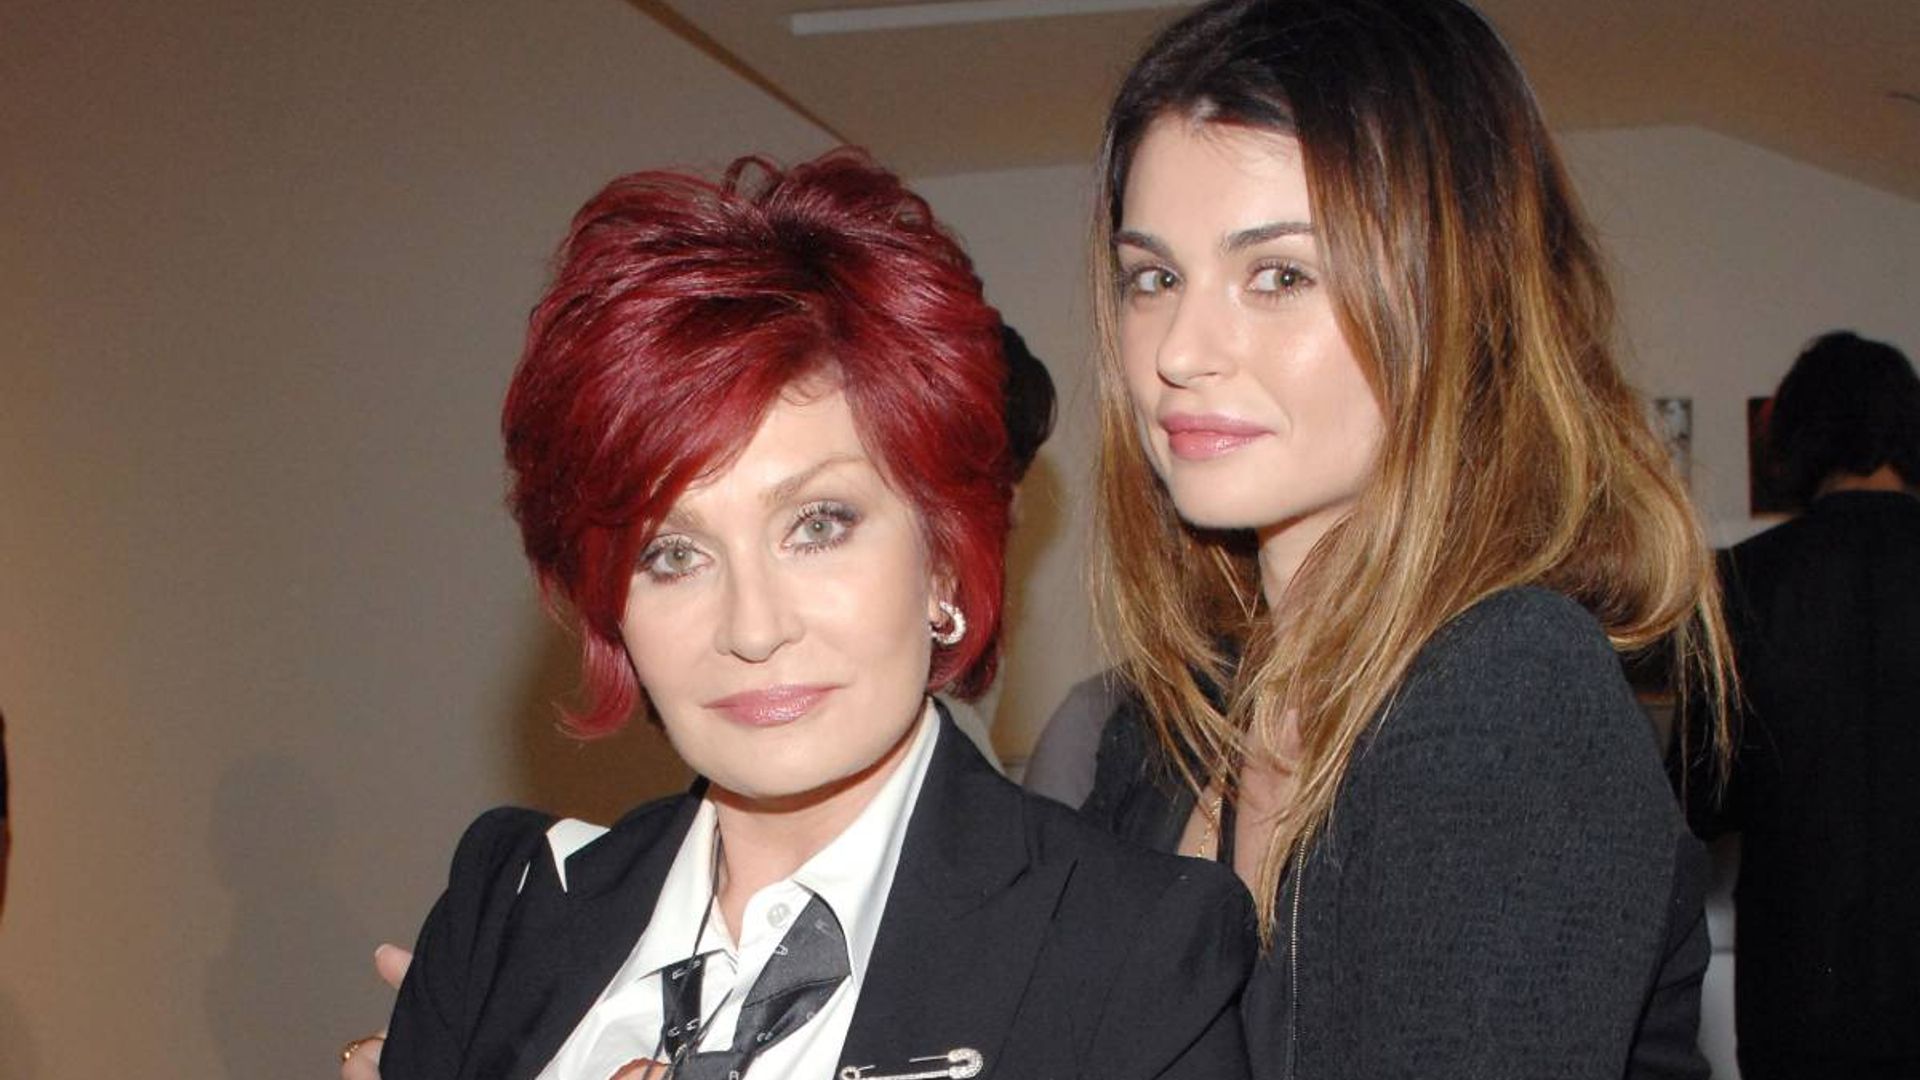 Sharon Osbourne shares rare photo of daughter Aimee to mark special celebration